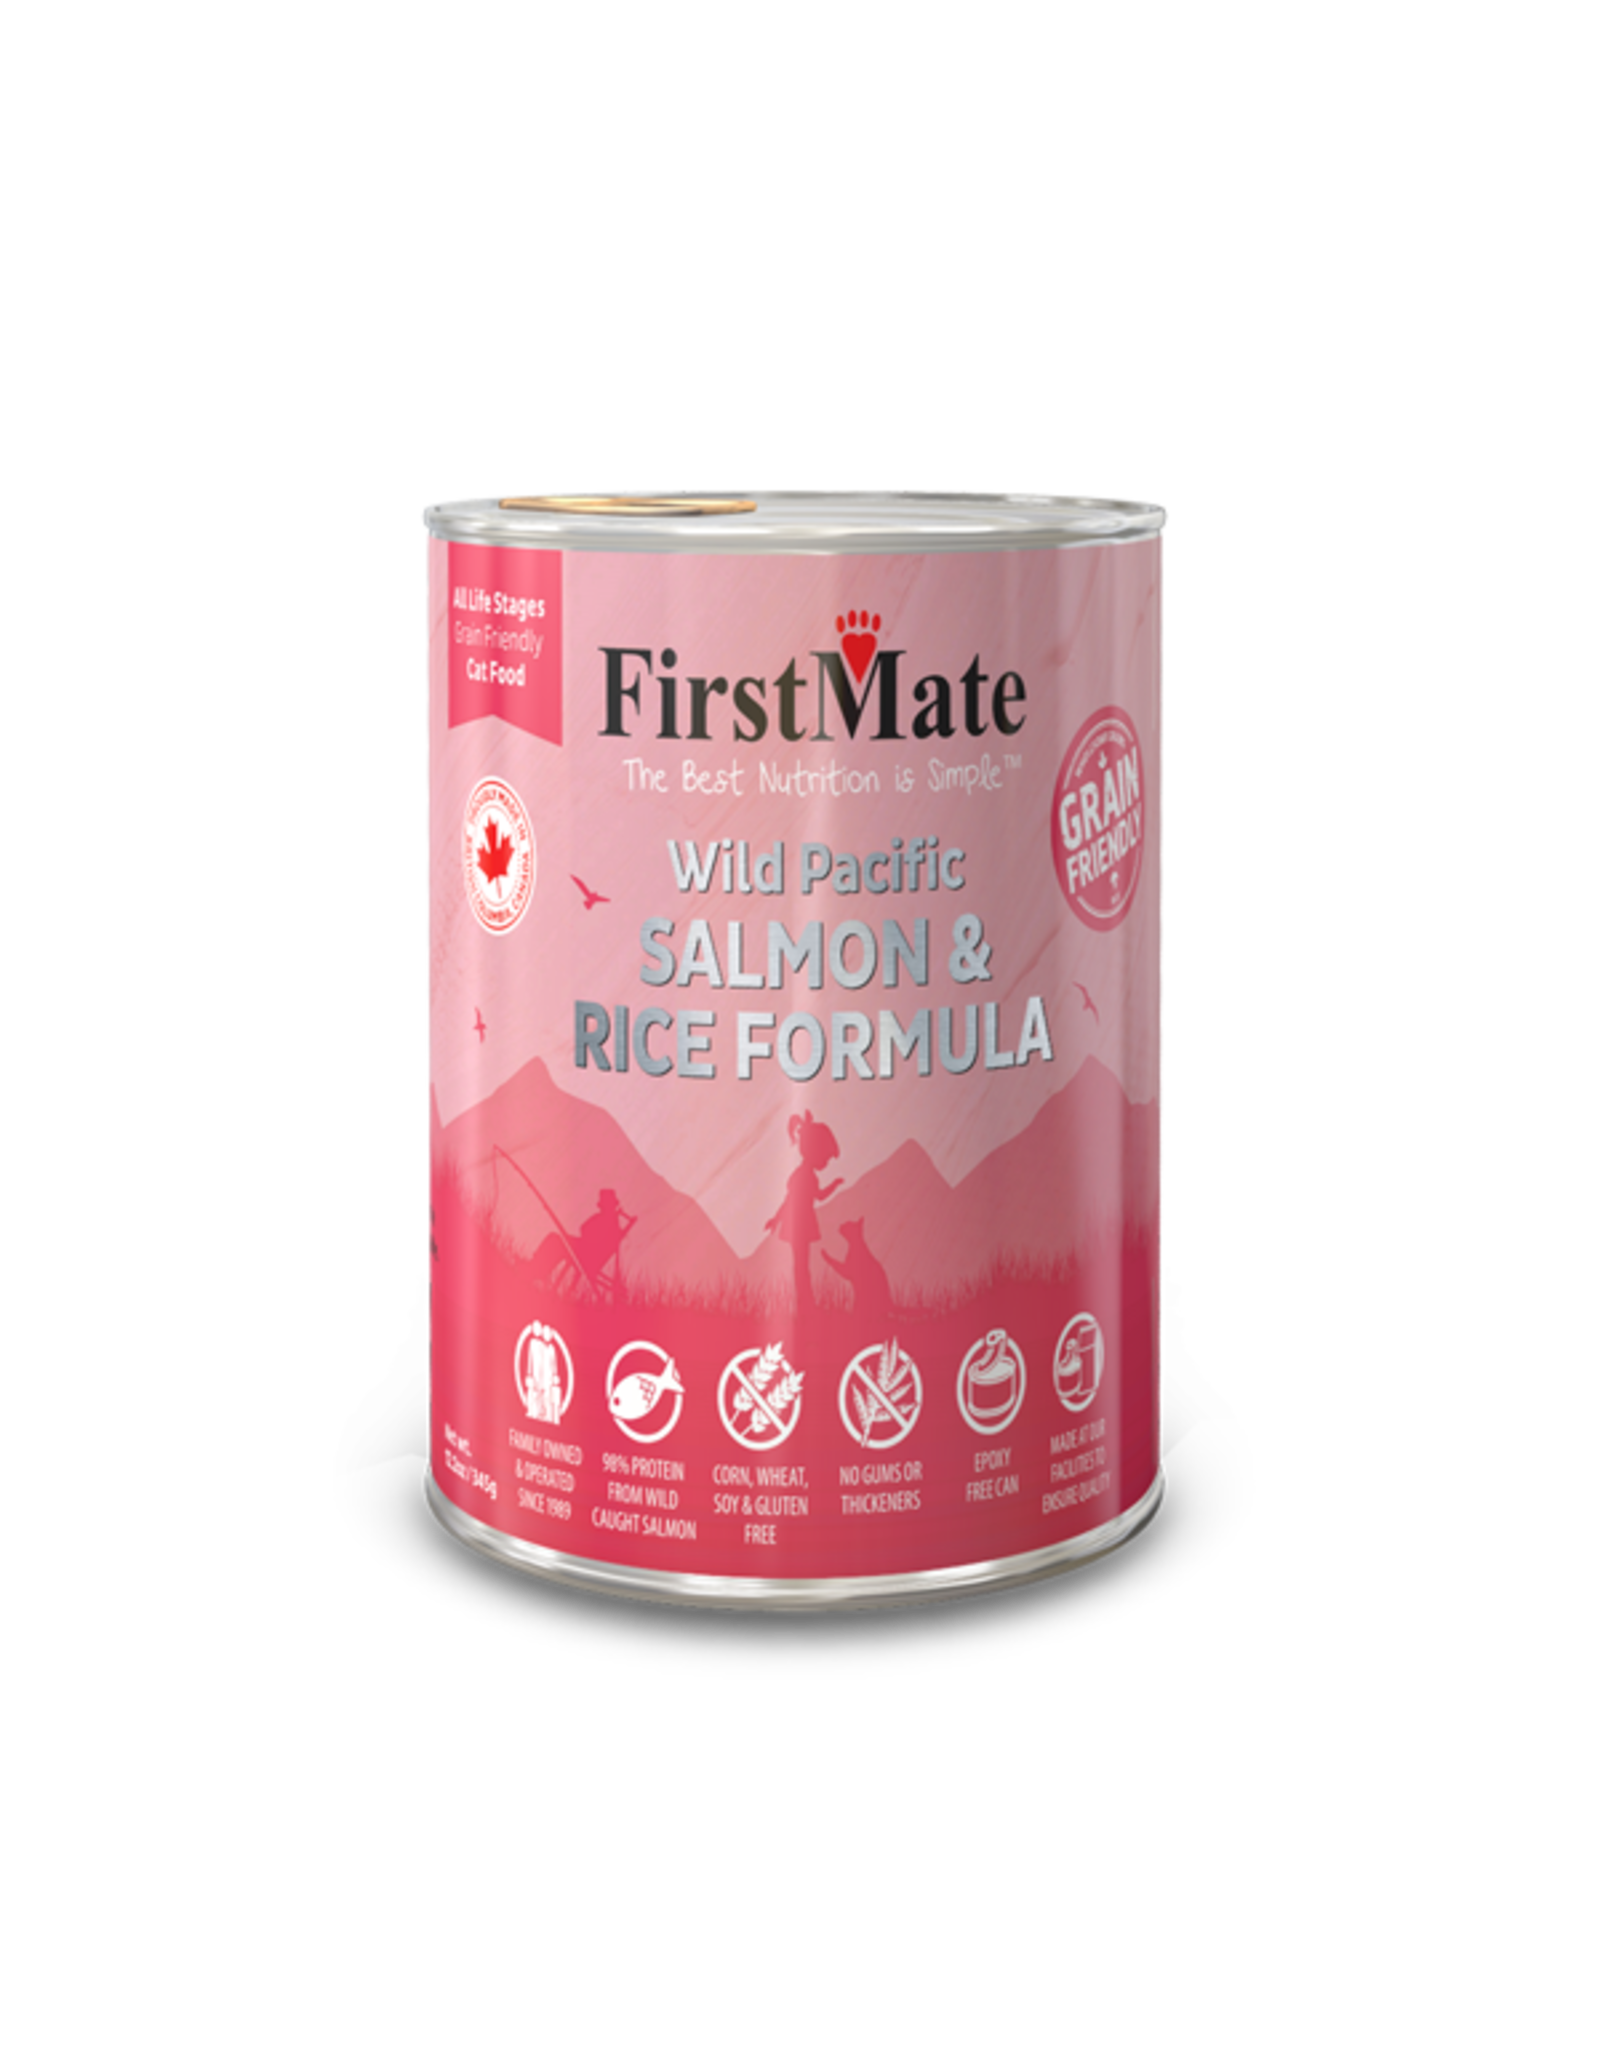 First Mate First Mate Cat Salmon and Rice Formula